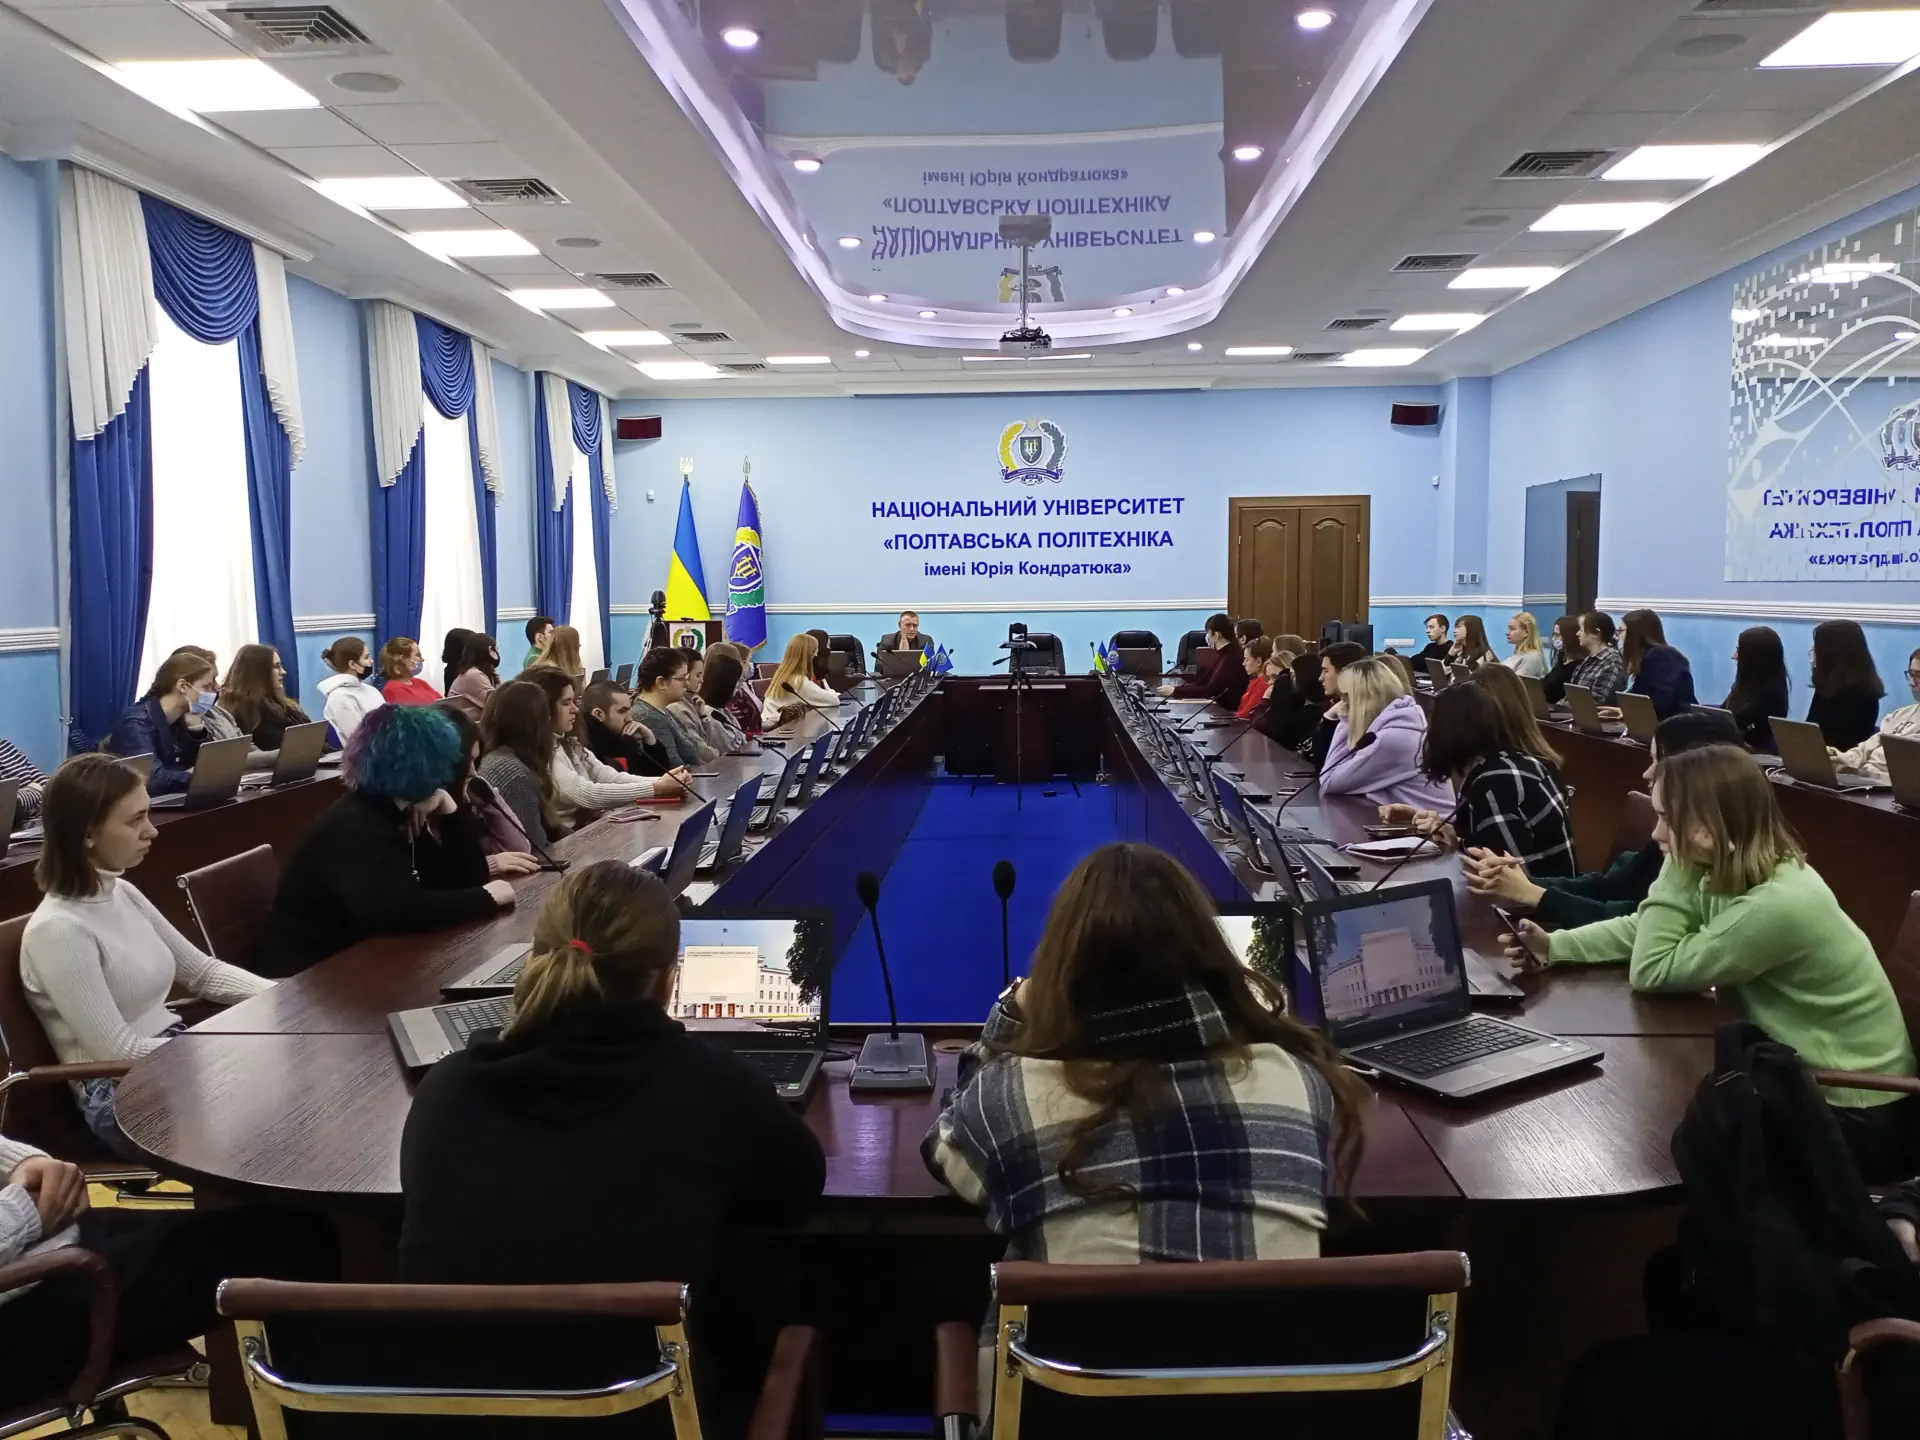 Students and lecturers of the Faculty of Humanities learn how to prevent corruption offenses